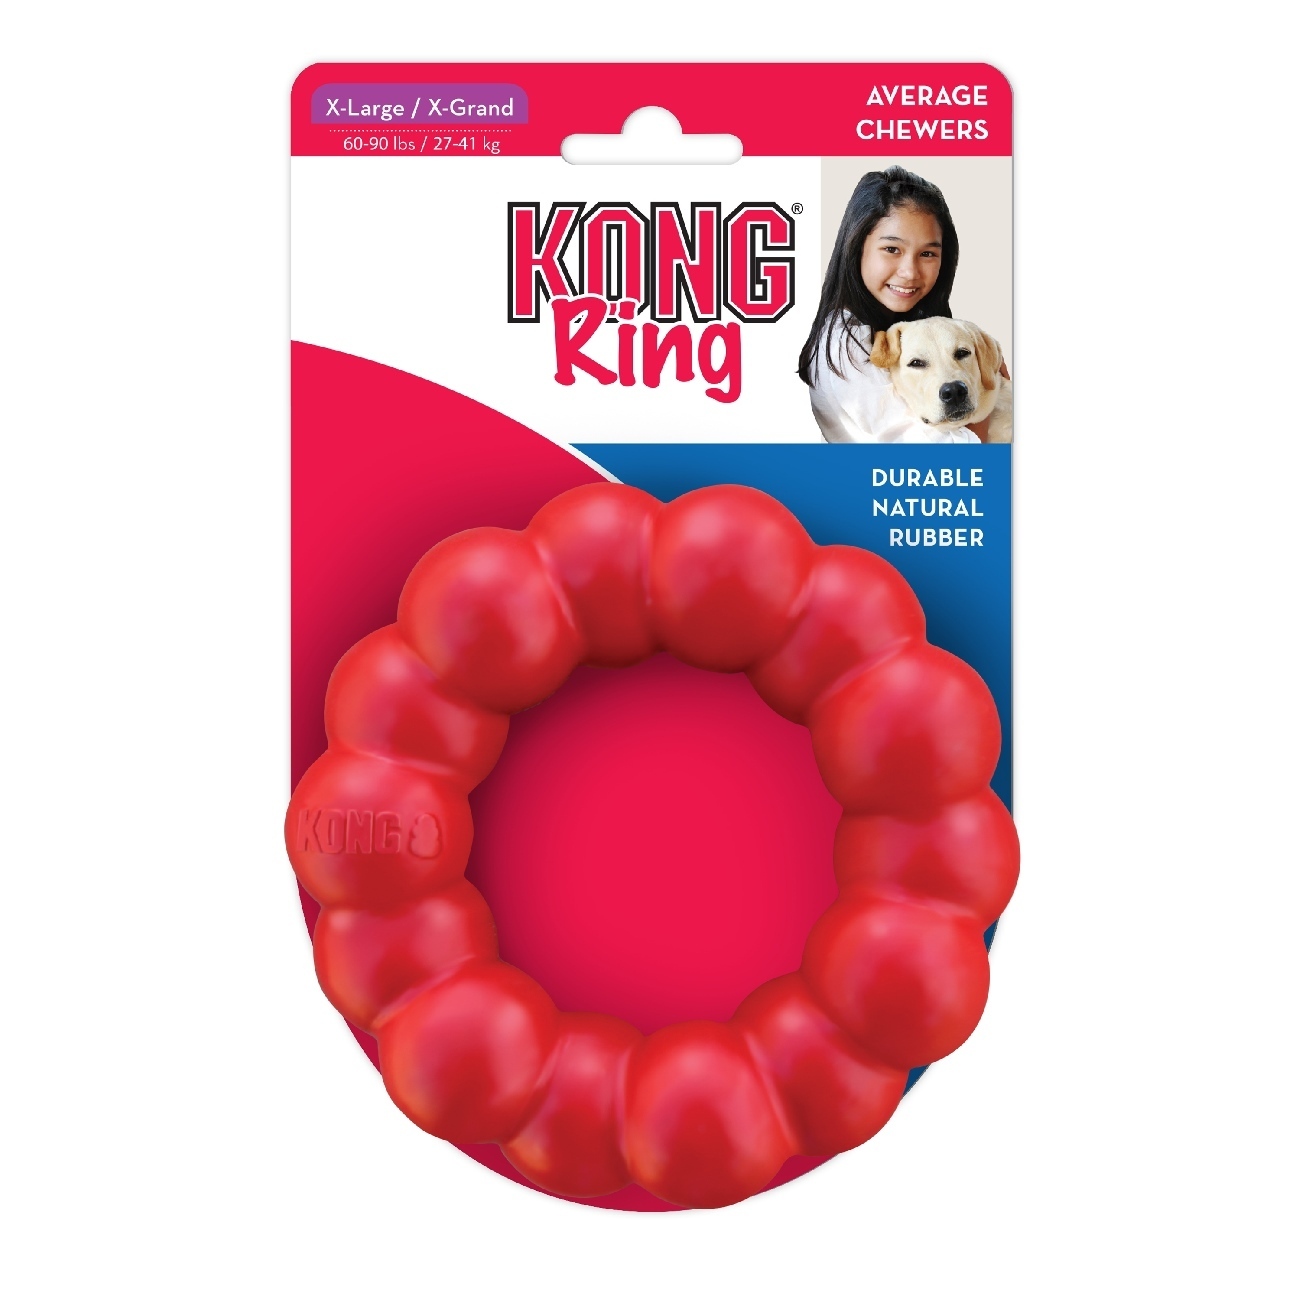 KONG Natural Red Rubber Ring Dog Toy for Healthy Teeth & Gums - X-Large - 3 Unit/s image 1